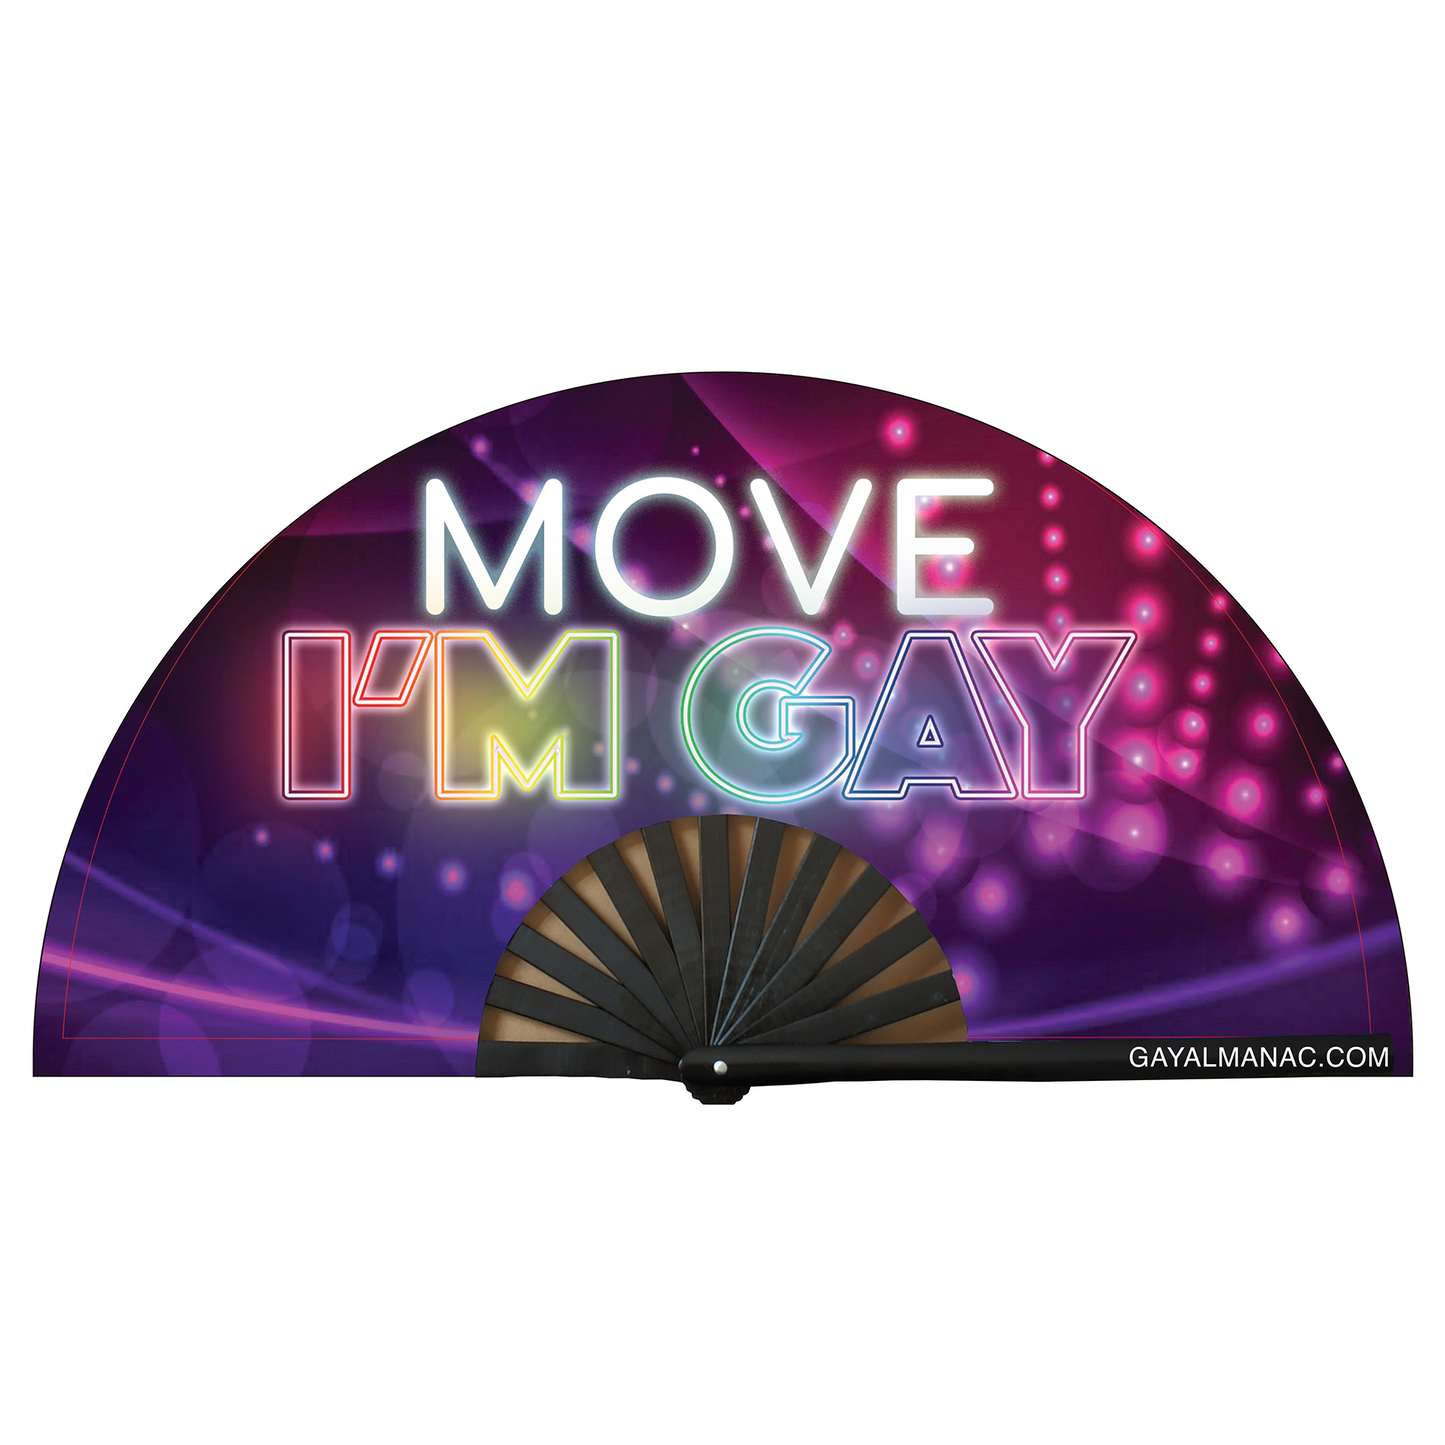 Move, I'm Gay (PINK) Fan